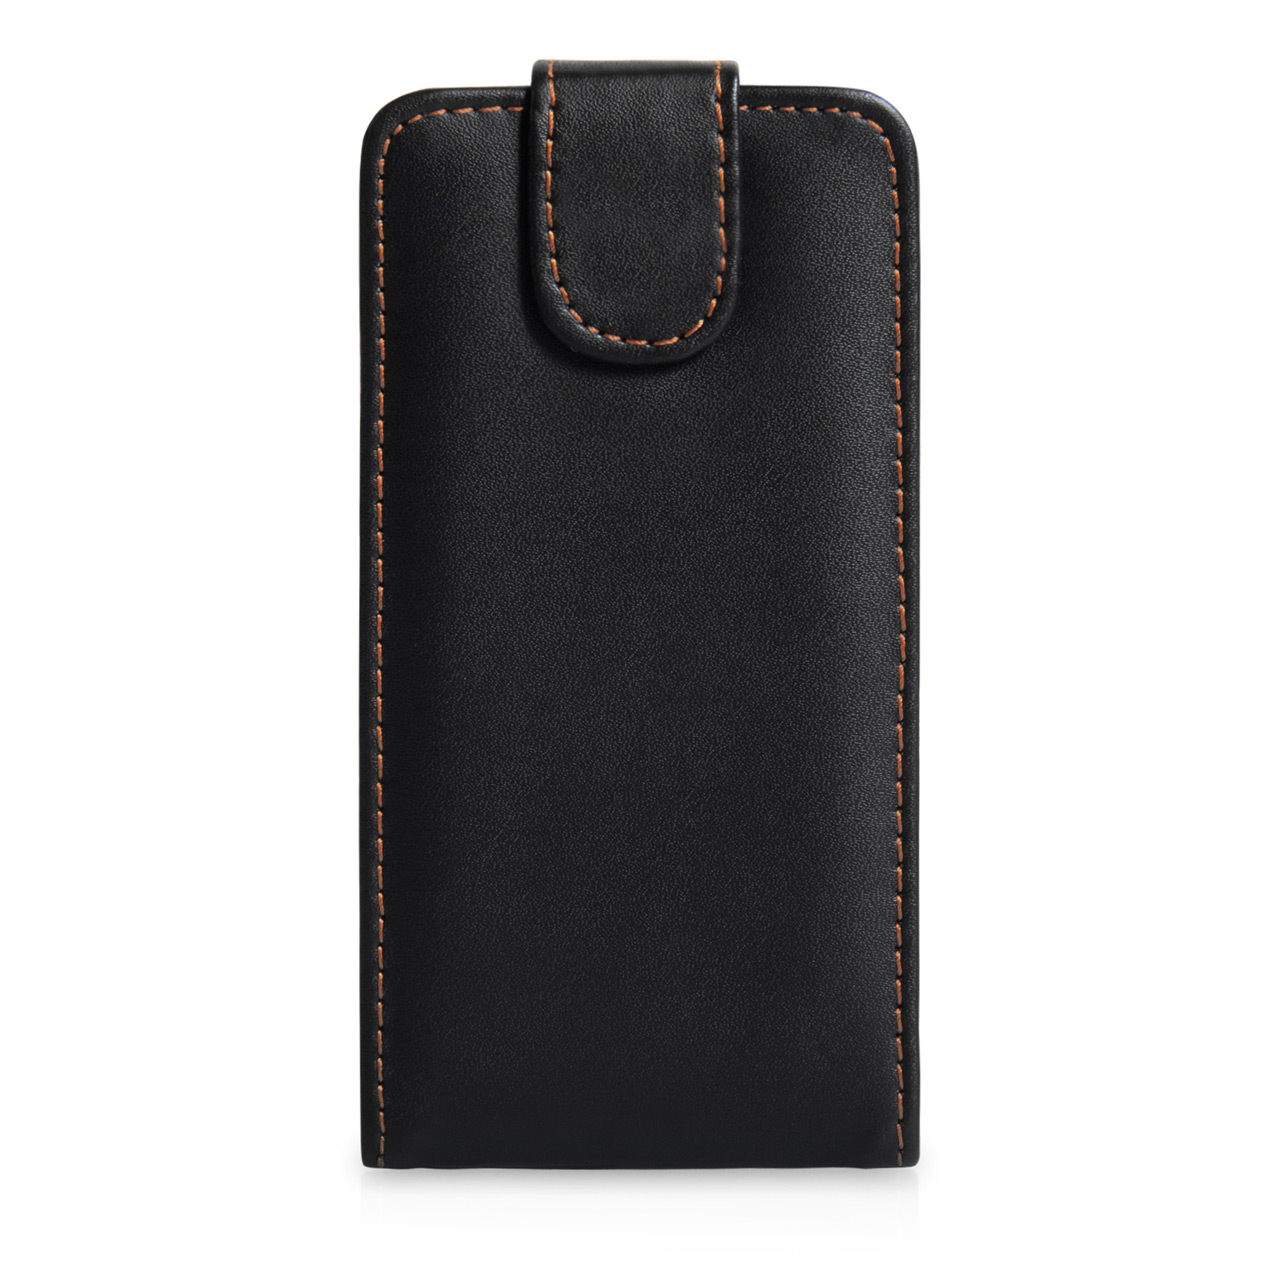 YouSave Accessories Sony Xperia SP Leather-Effect Flip Case - Black